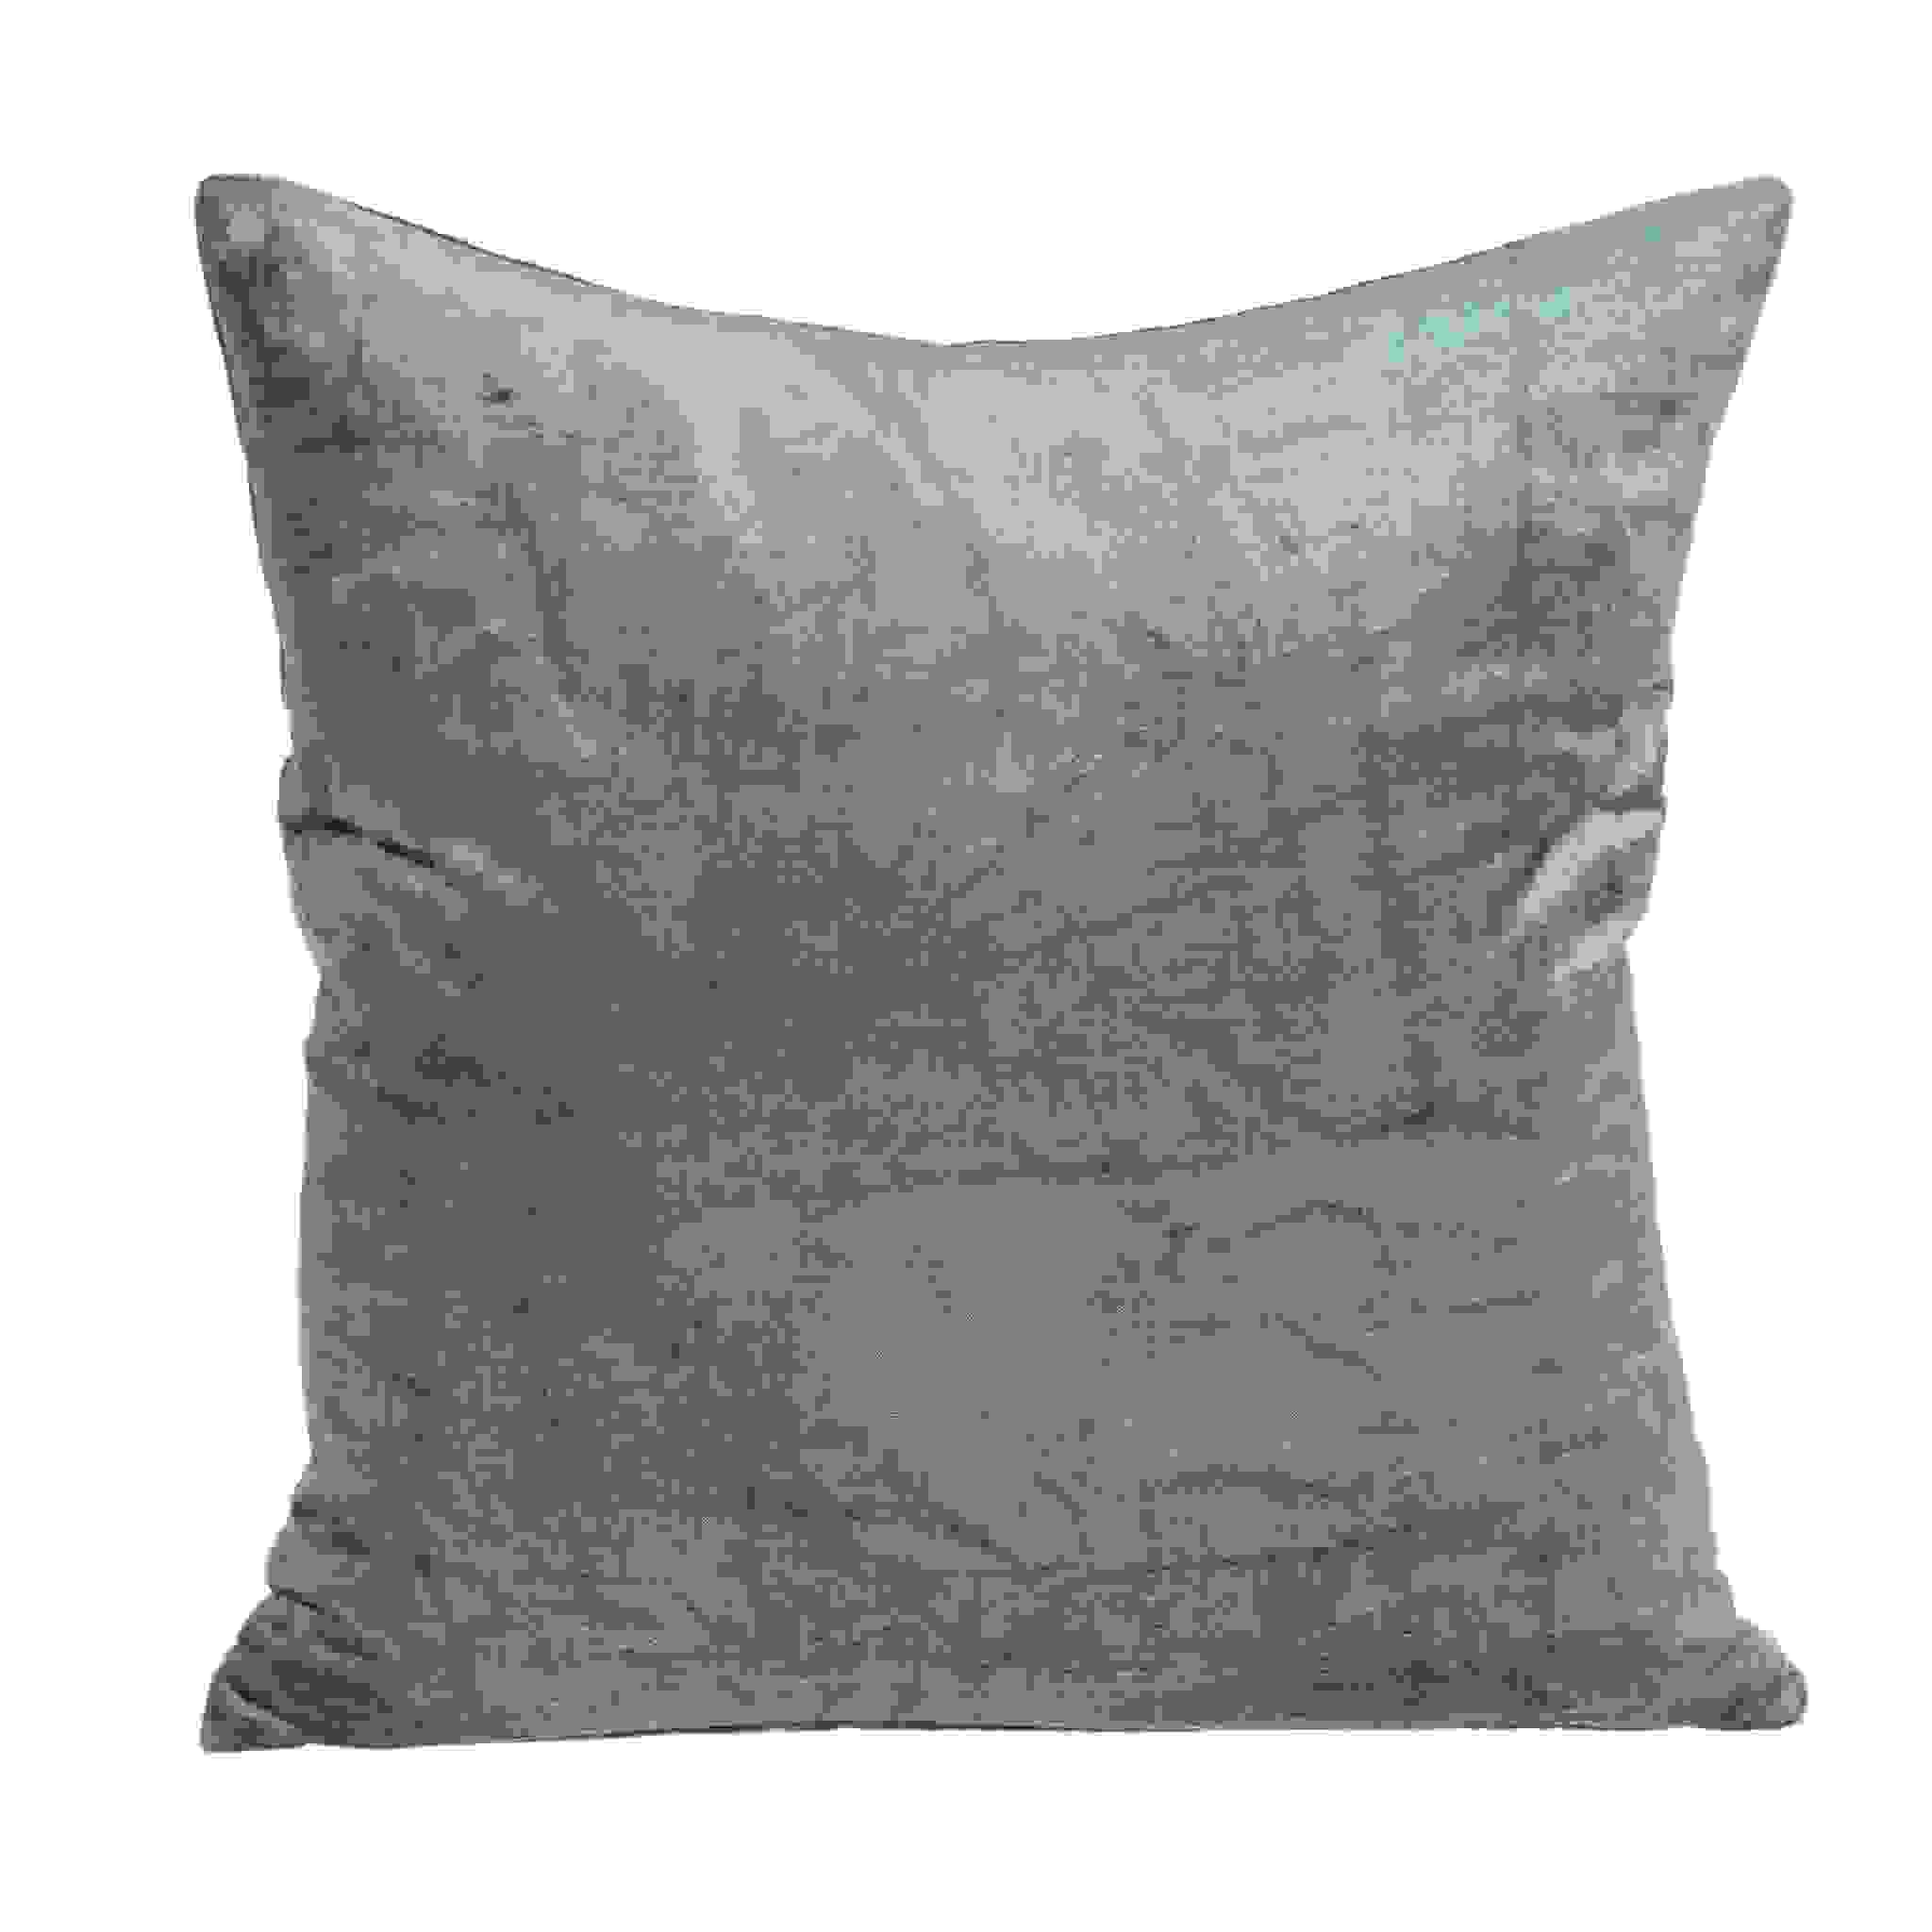 20" x 0.5" x 20" Transitional Green Solid Pillow Cover